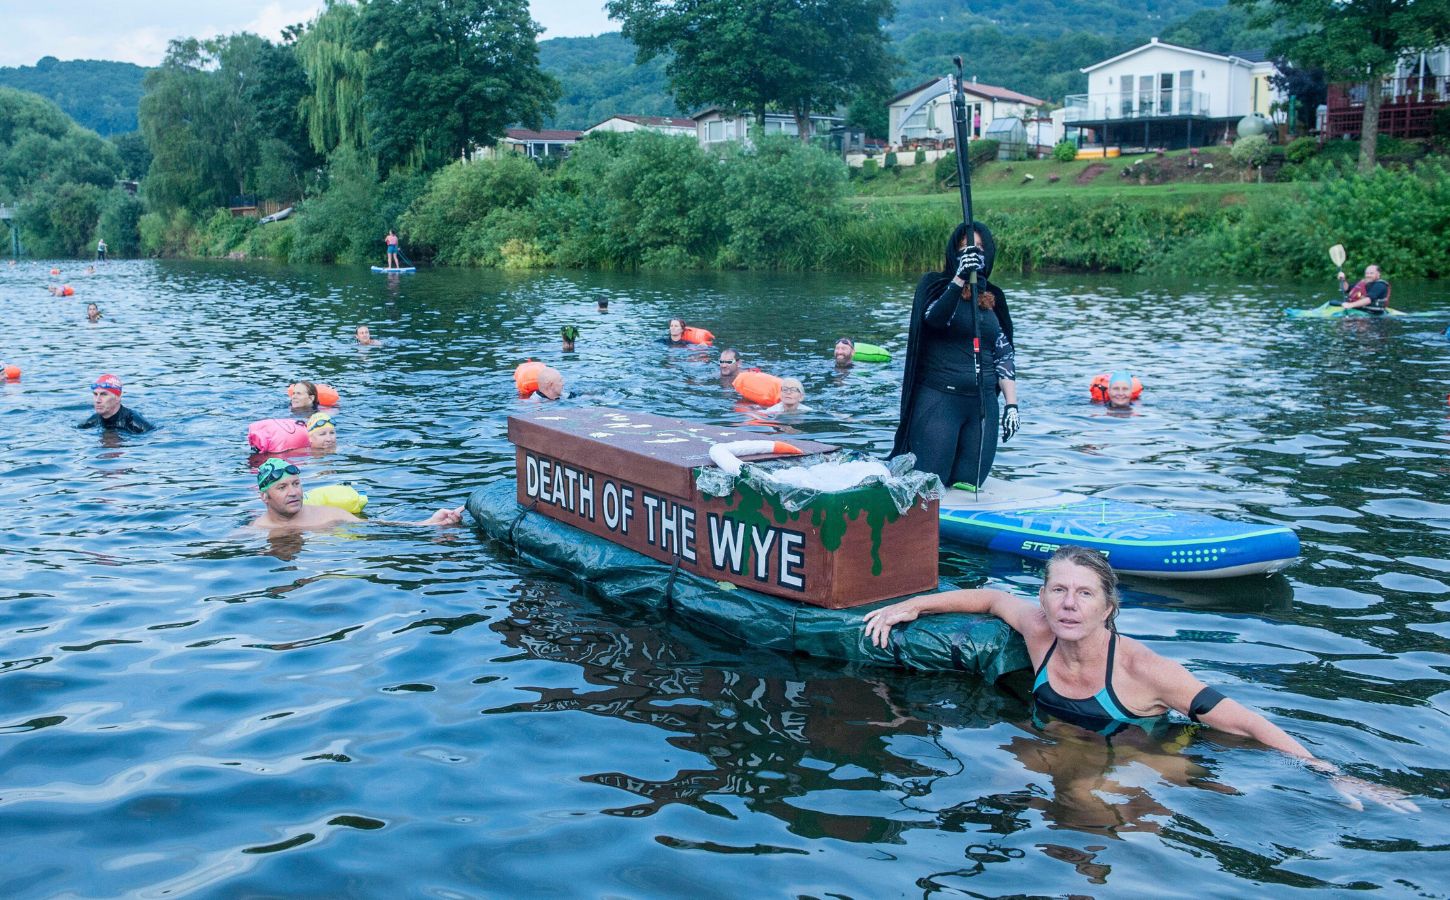 campaigners highlight River Wye pollution